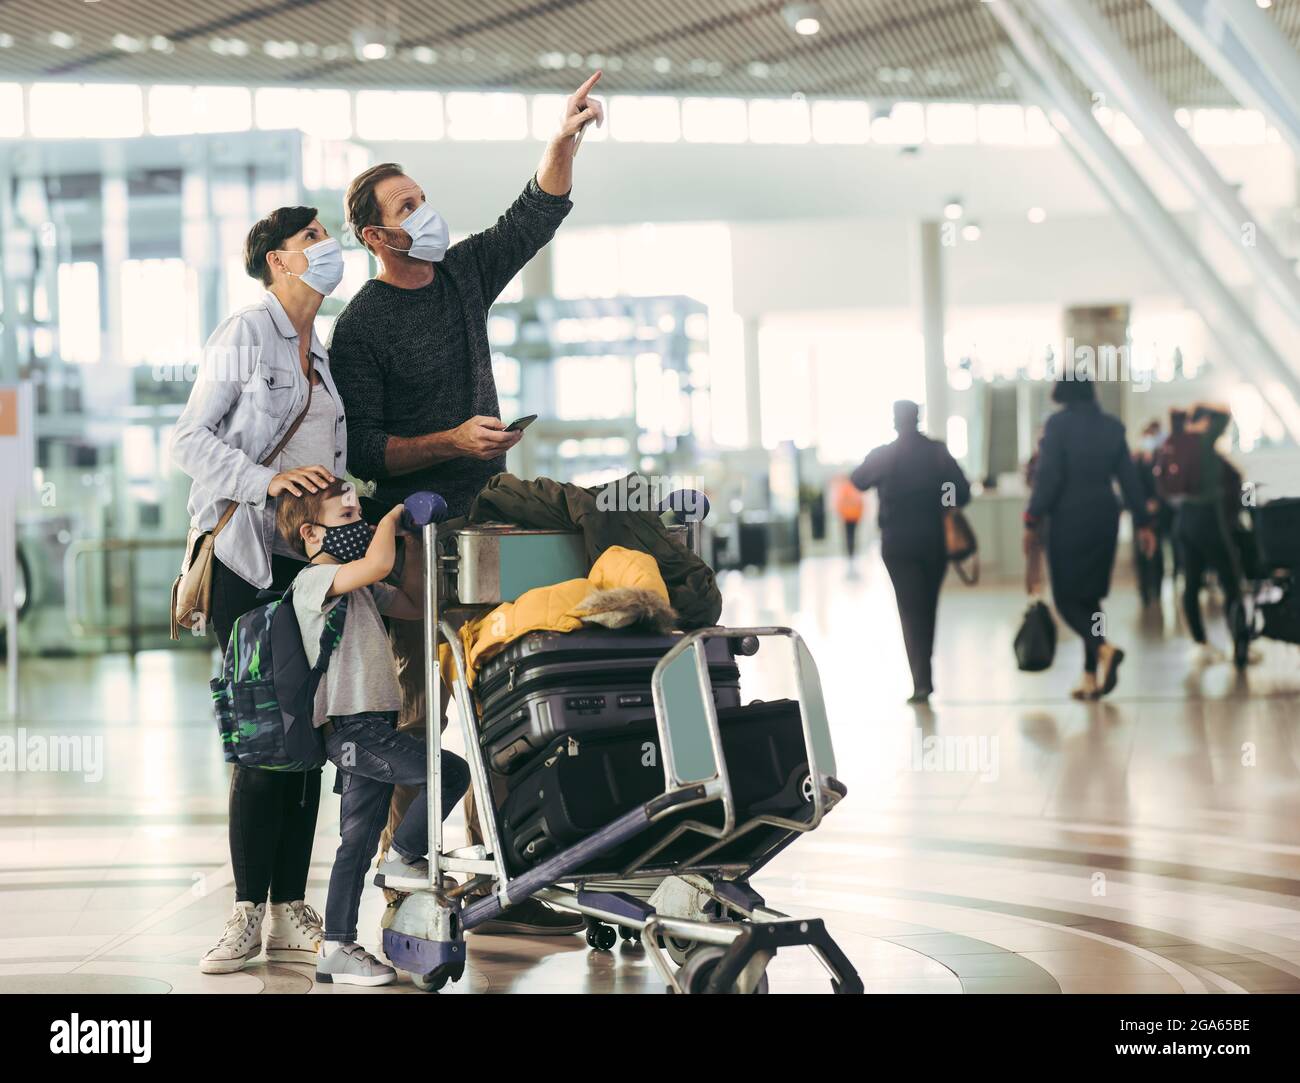 Man pointing at arrival departure board and talking wife at airport.  Family with luggage trolley waiting for their flight at airport. Stock Photo